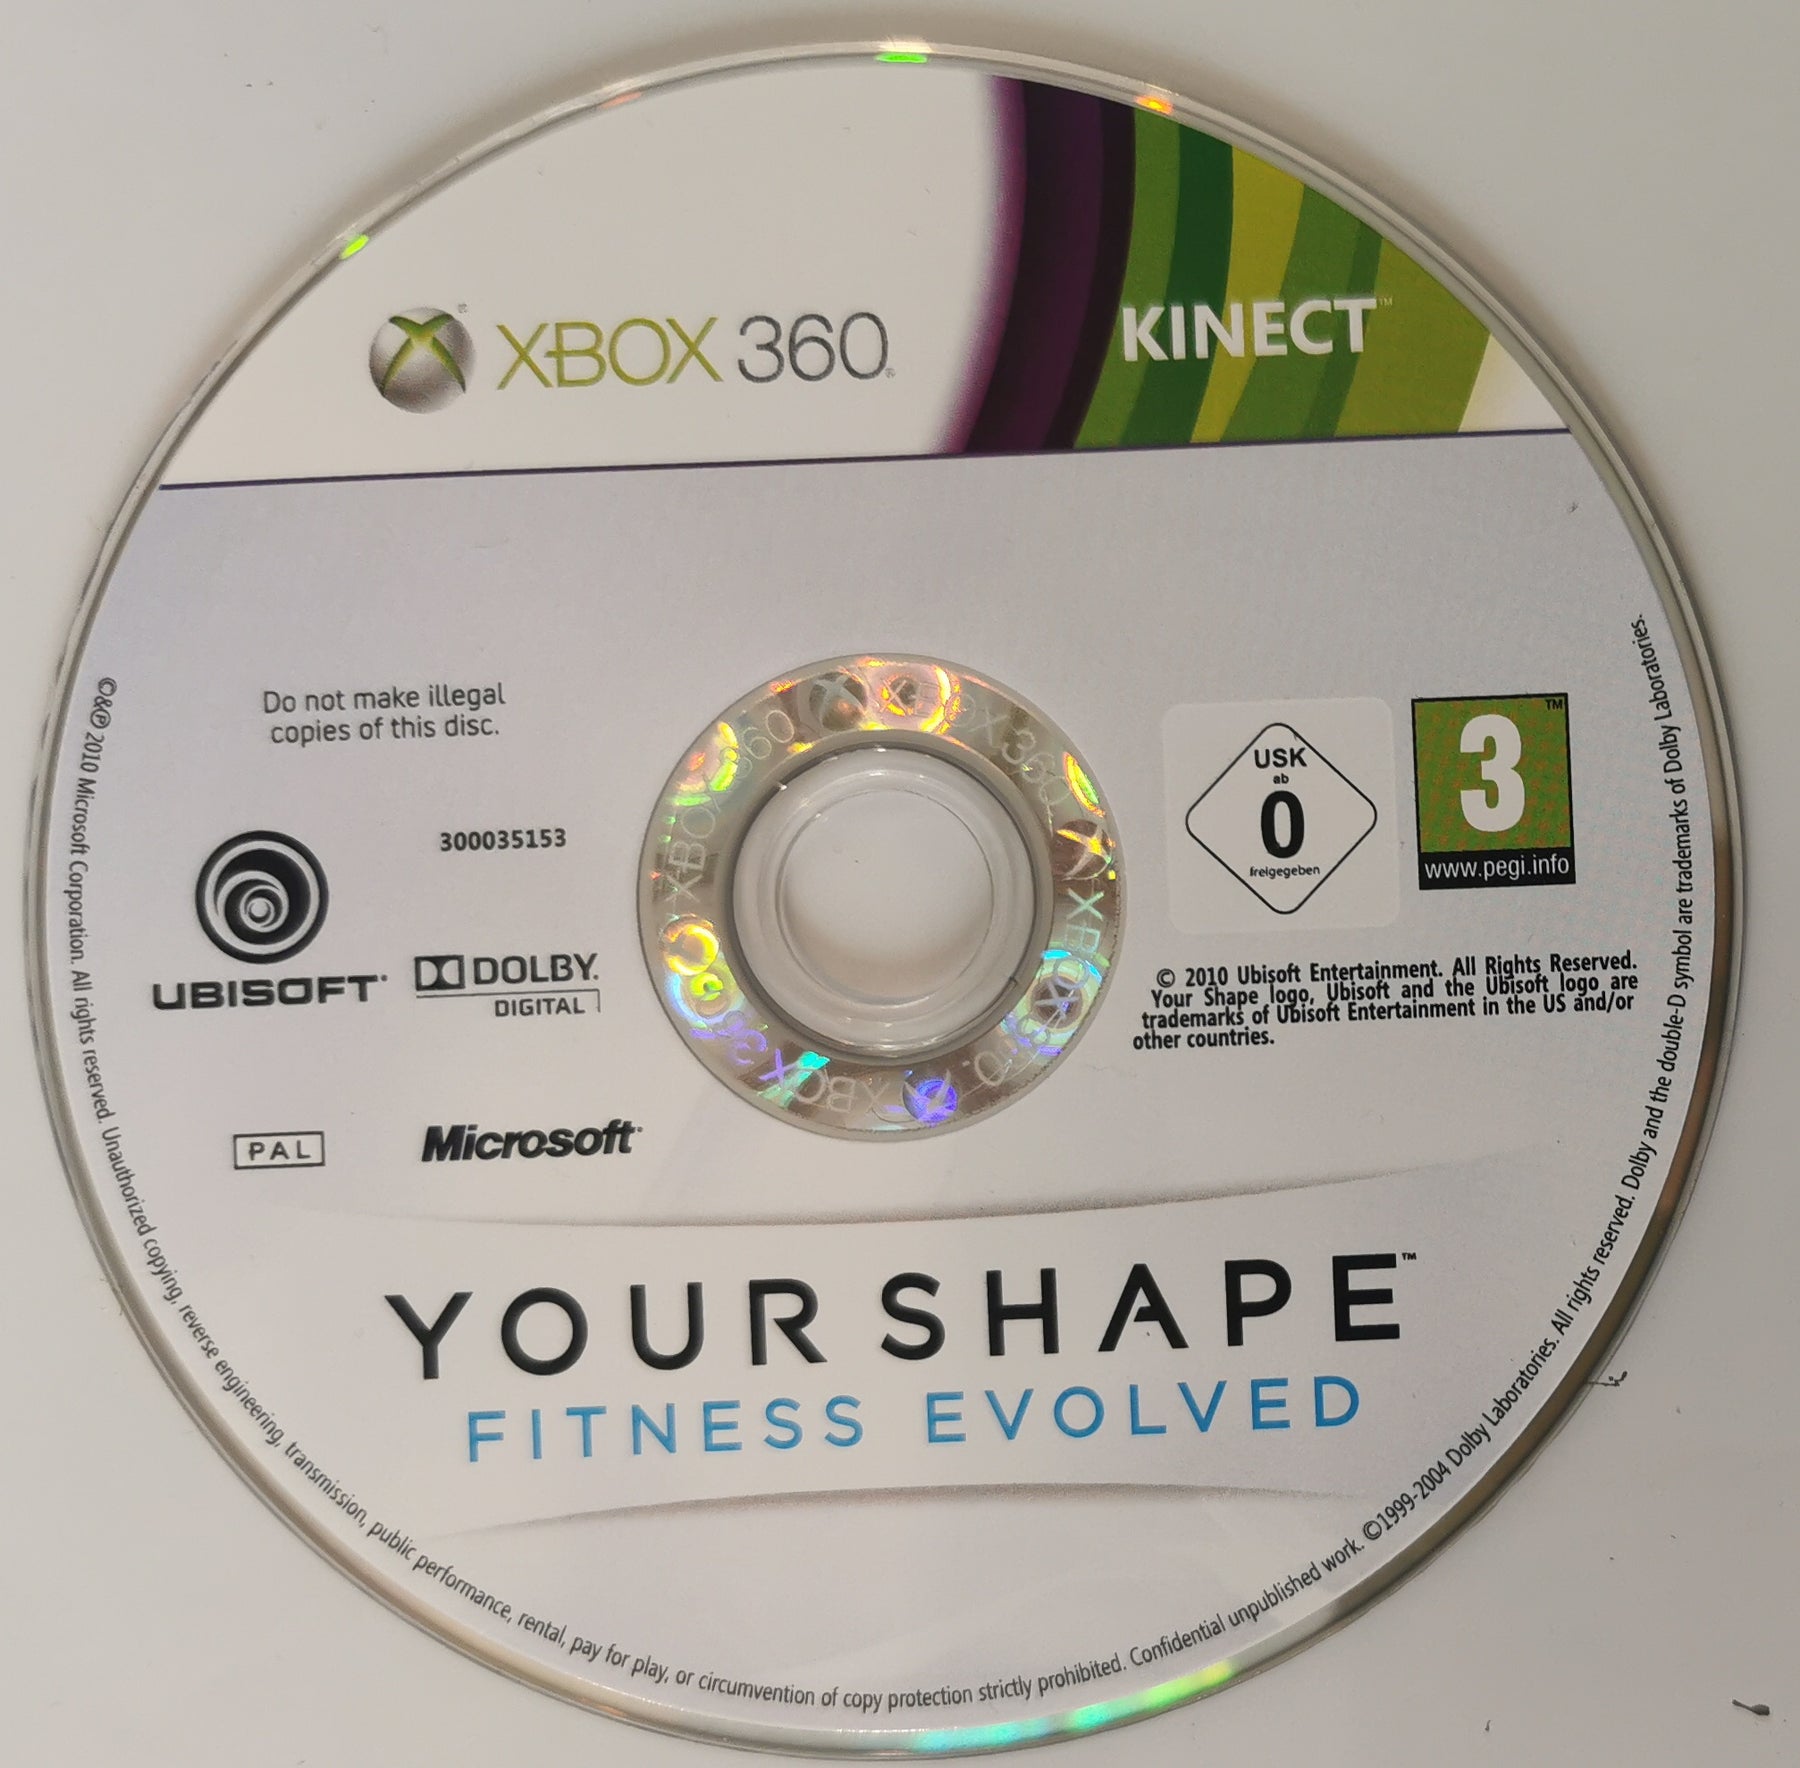 Your Shape Fitness Evolved 2012 Kinect erforderlich (Xbox 360) [Gut]